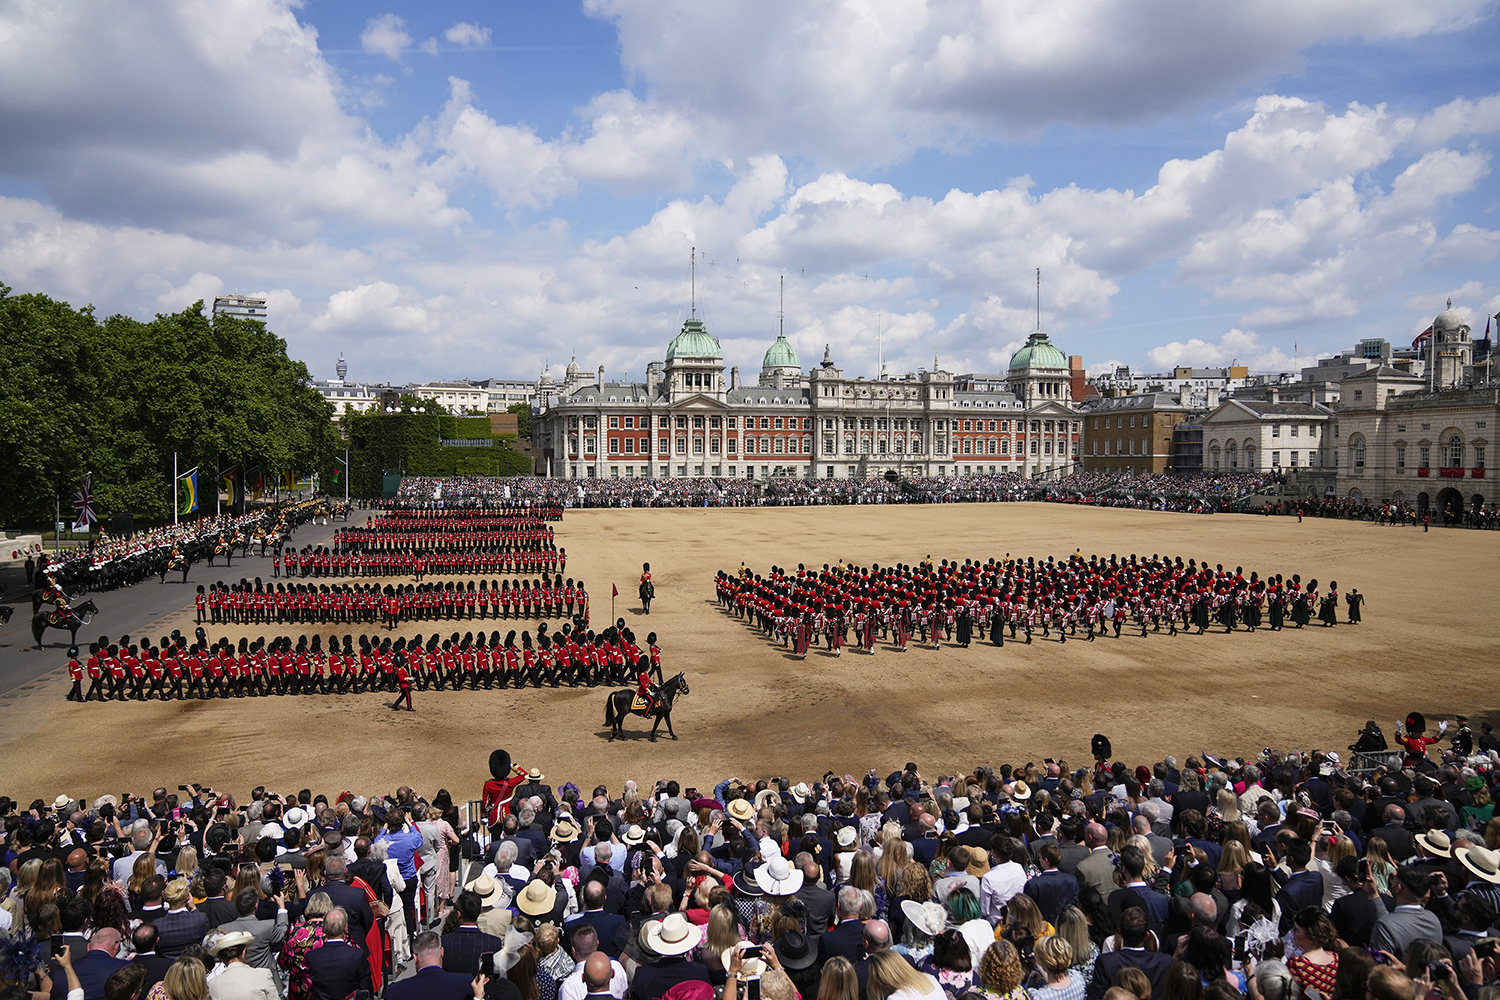 The Queen's guards march during the Trooping the Color parade at Horse Guards, London, Thursday, June 2, 2022, on the first of four days of celebrations to mark the Platinum Jubilee. The events over a long holiday weekend in the U.K. are meant to celebrate the monarch's 70 years of service.(AP Photo/Matt Dunham)